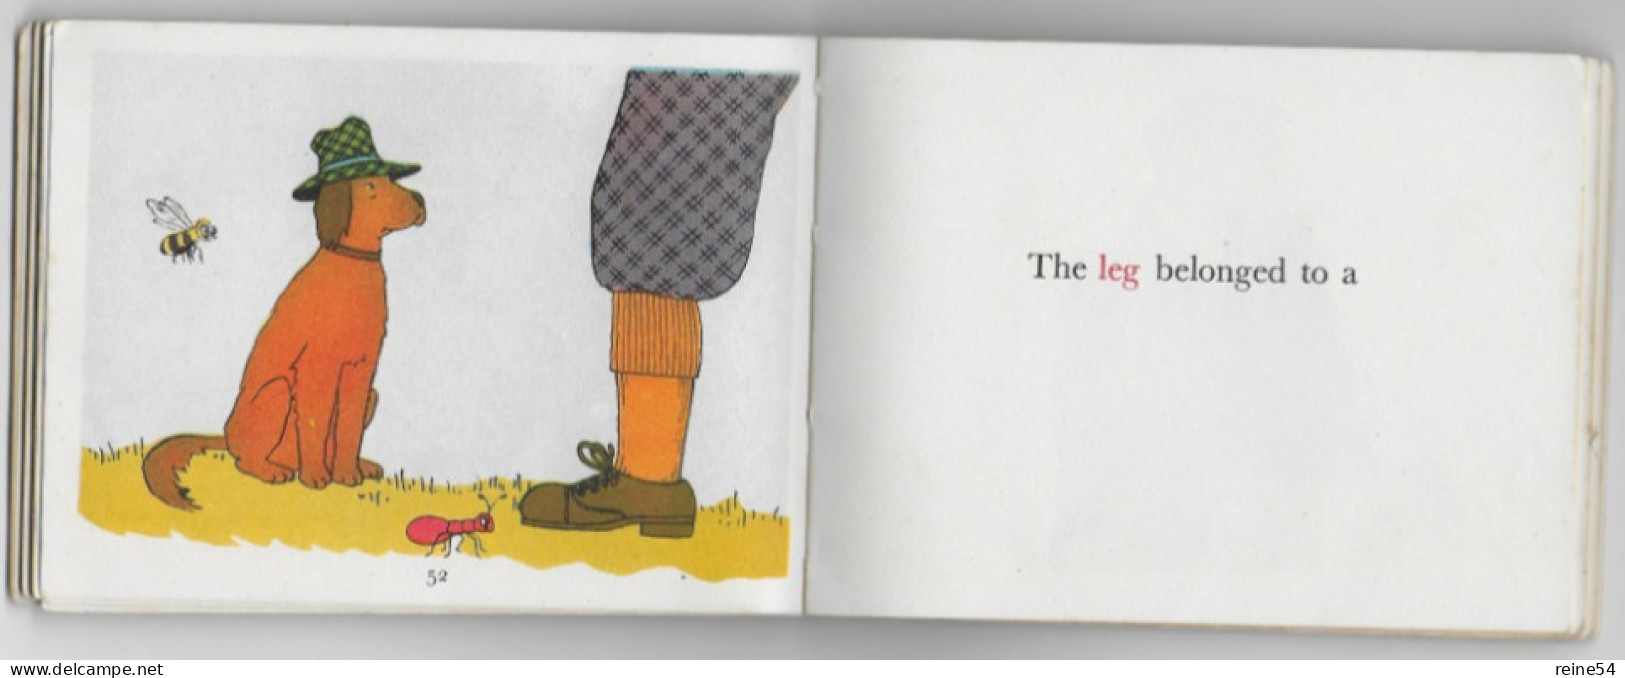 ANT And BEE -Angela BANNER -An Alphabetical Story For Tiny Tots- Edmund Ward - Schulbücher